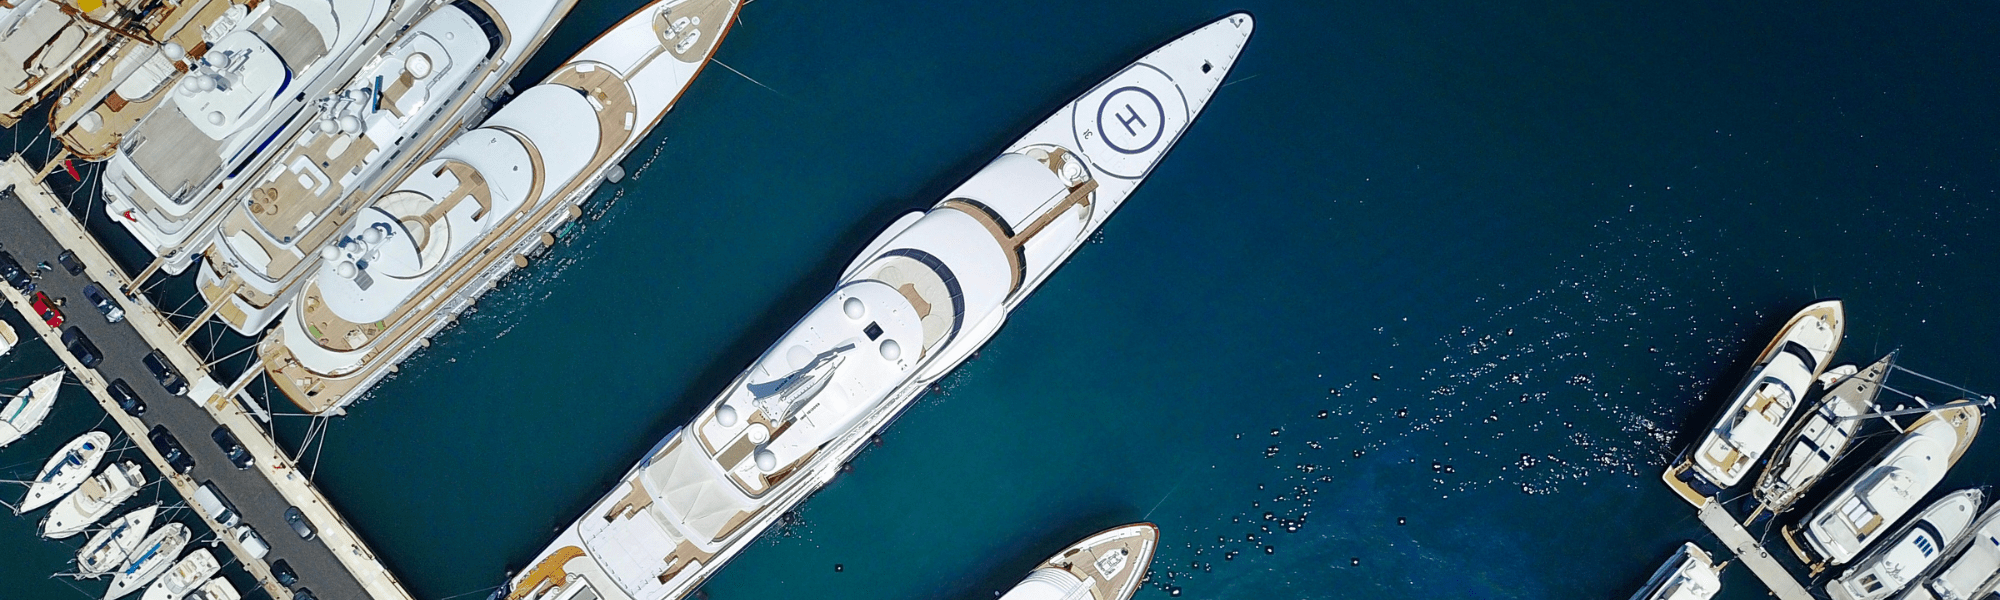 Results from the Superyacht Captain Survey Revealed